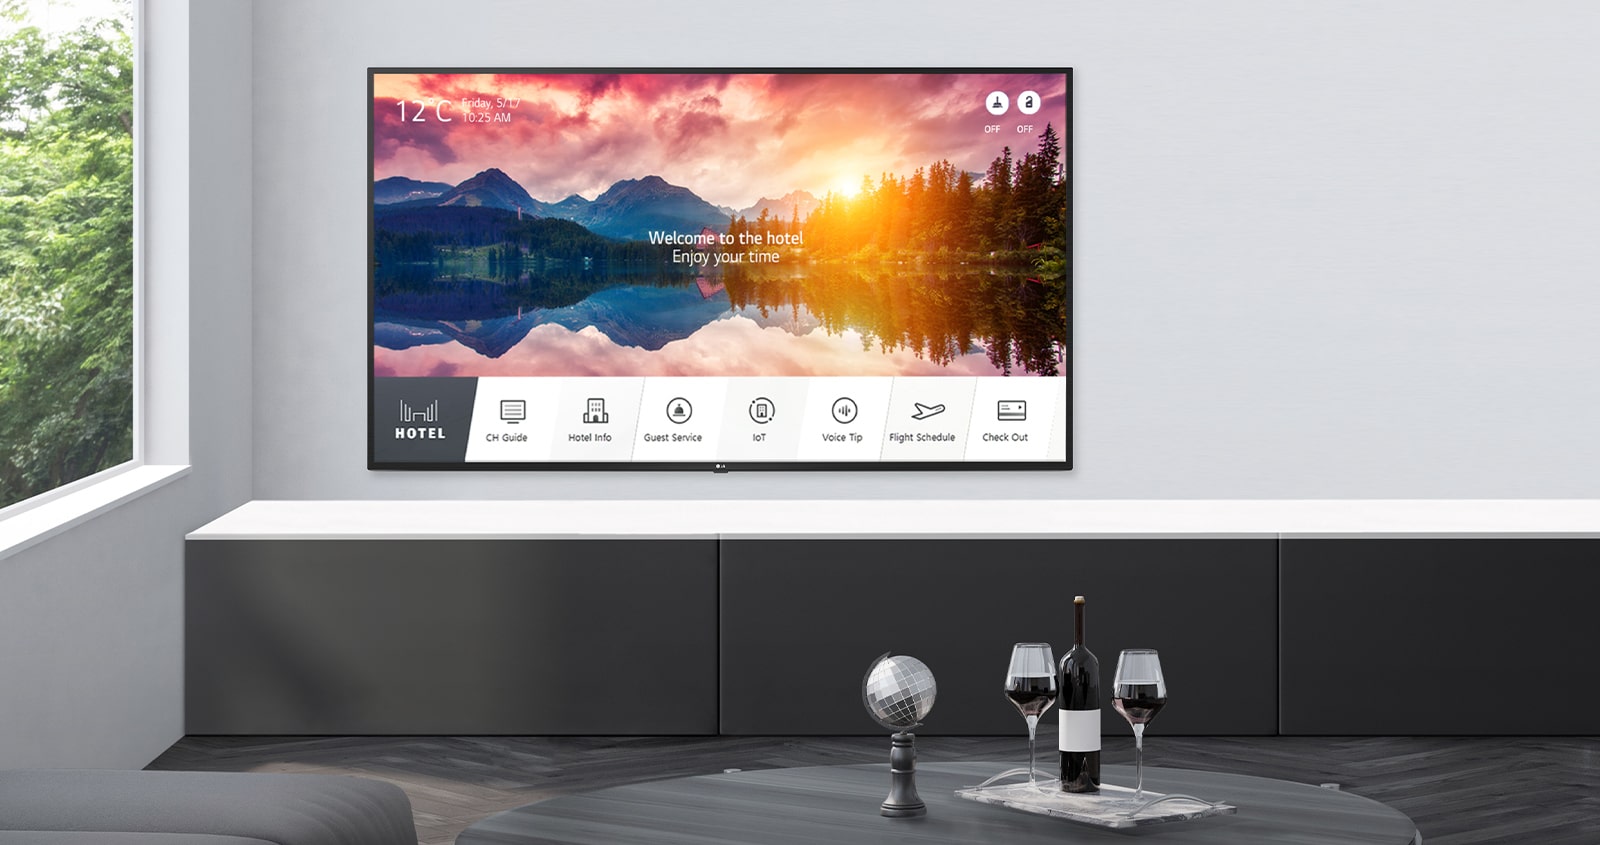 Lg 43us660h Na 4k Uhd Hospitality Tv With Procentric Direct Lg